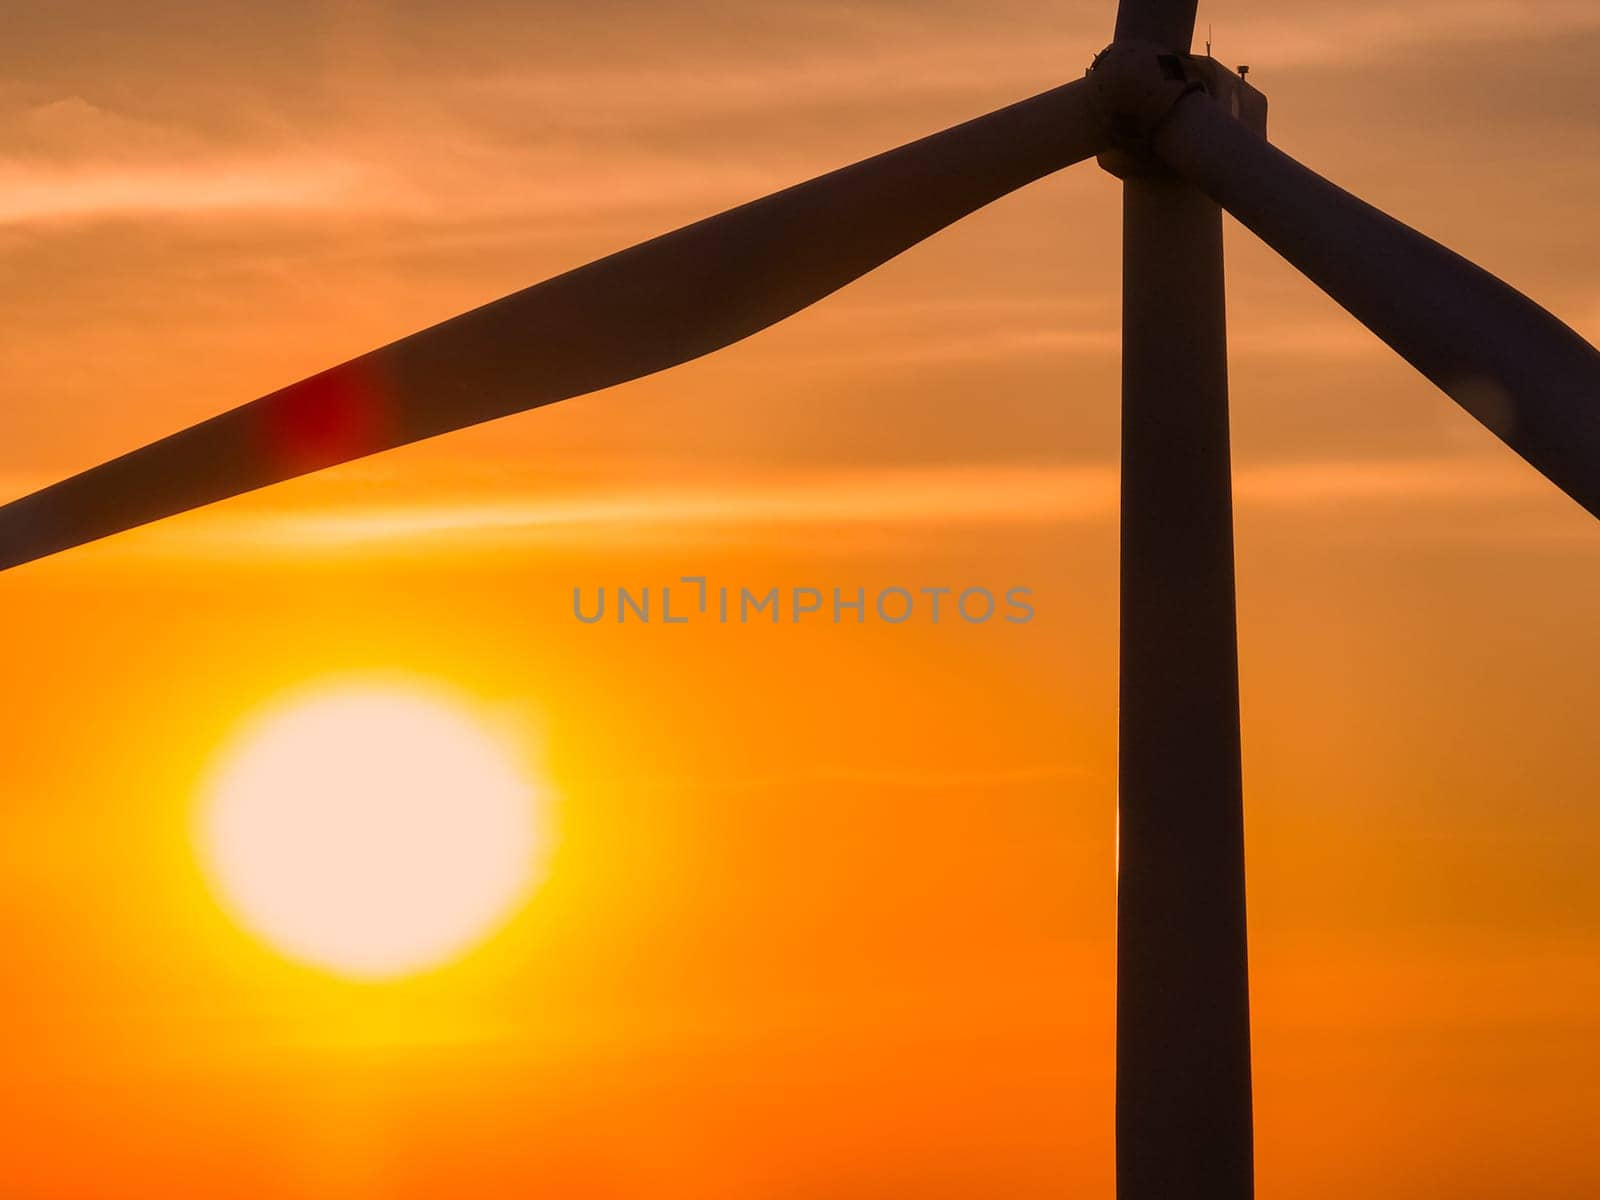 Wind farm field and sunset sky. Wind power. Sustainable, renewable energy. Wind turbines generate electricity. Sustainable development. Green technology for energy sustainability. Eco-friendly energy. by Fahroni